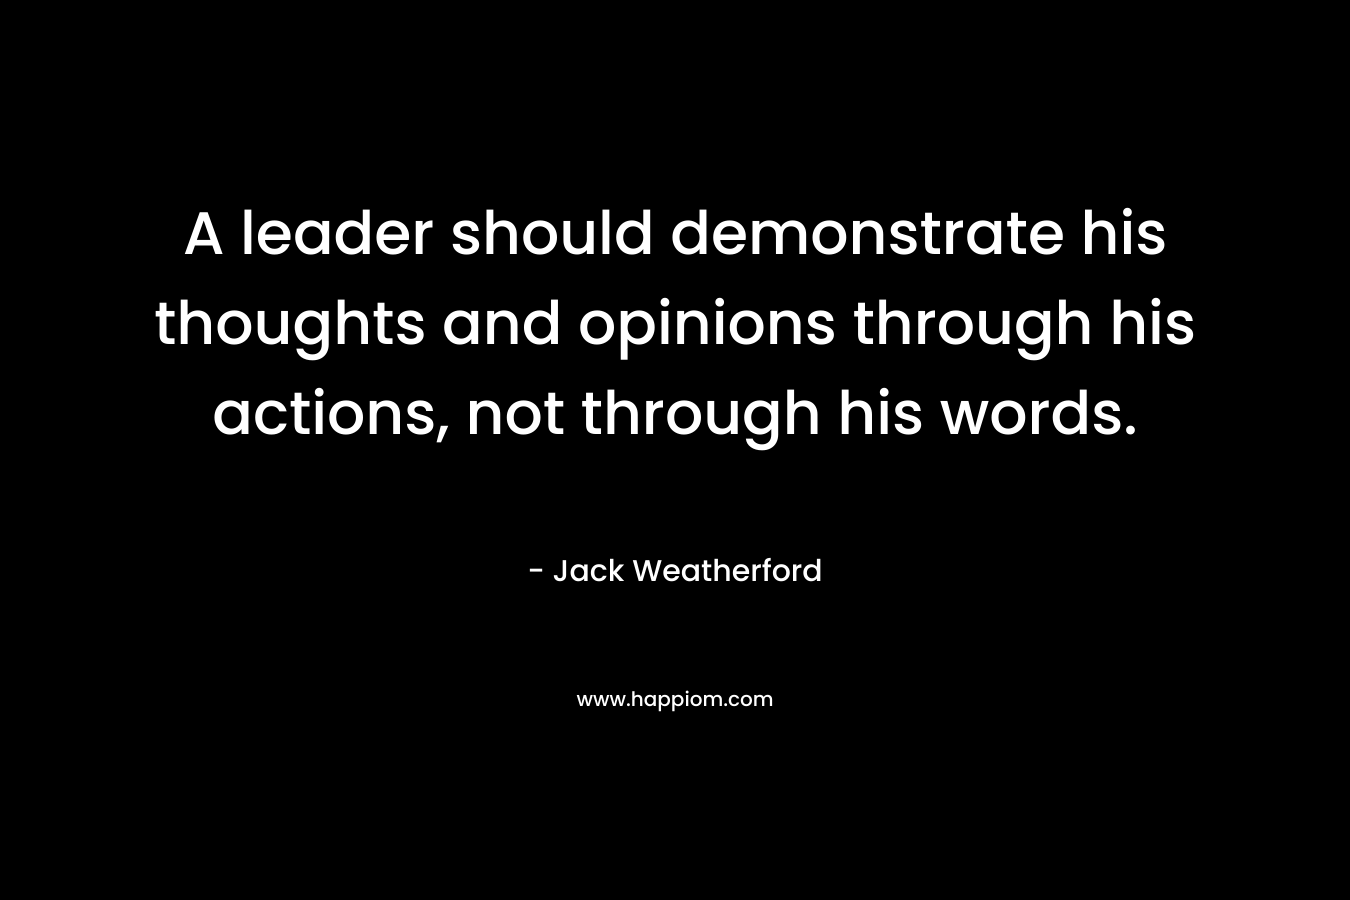 A leader should demonstrate his thoughts and opinions through his actions, not through his words.